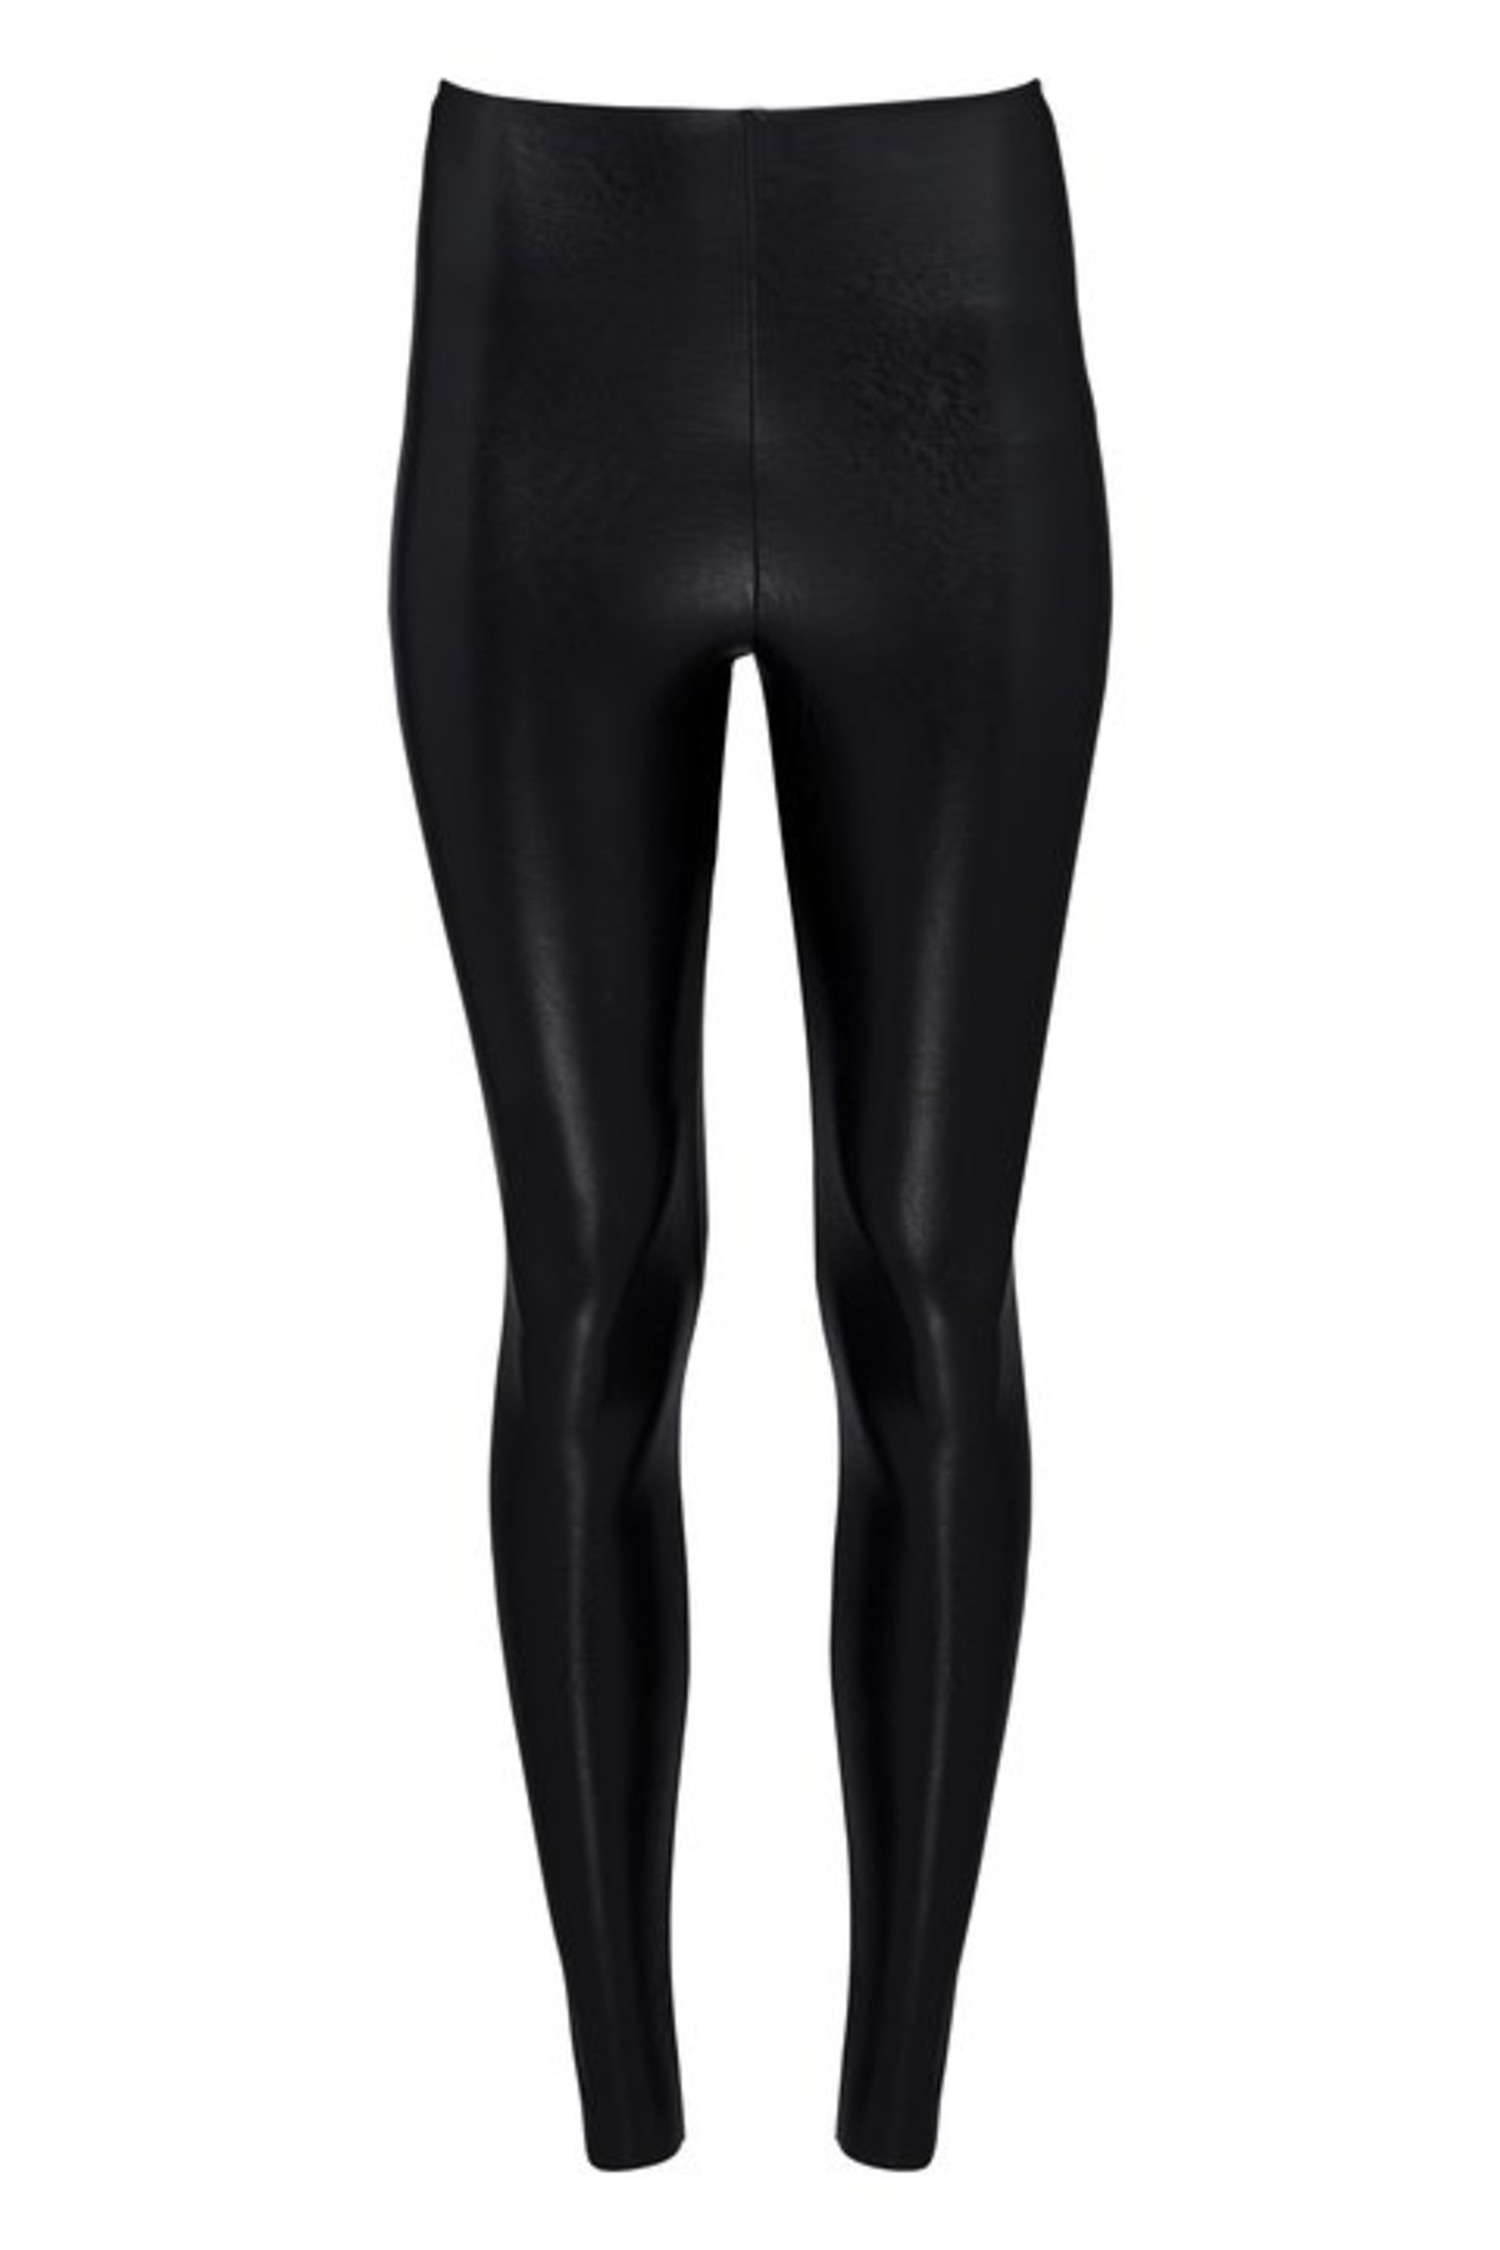 Faux Leather Legging Black SLG06 - Lace & Day